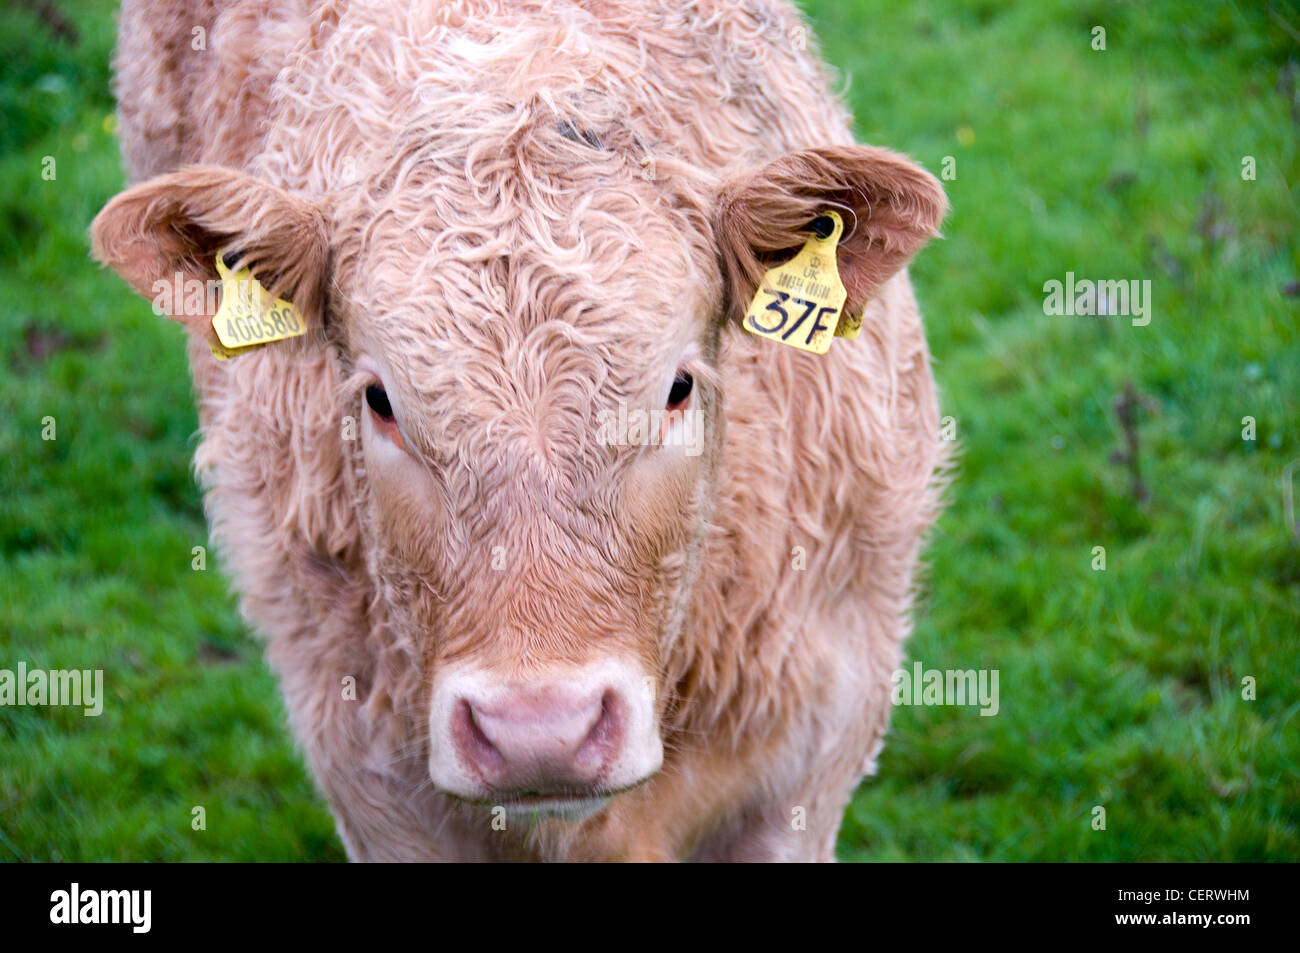 Cow with identification tags in the ears Stock Photo